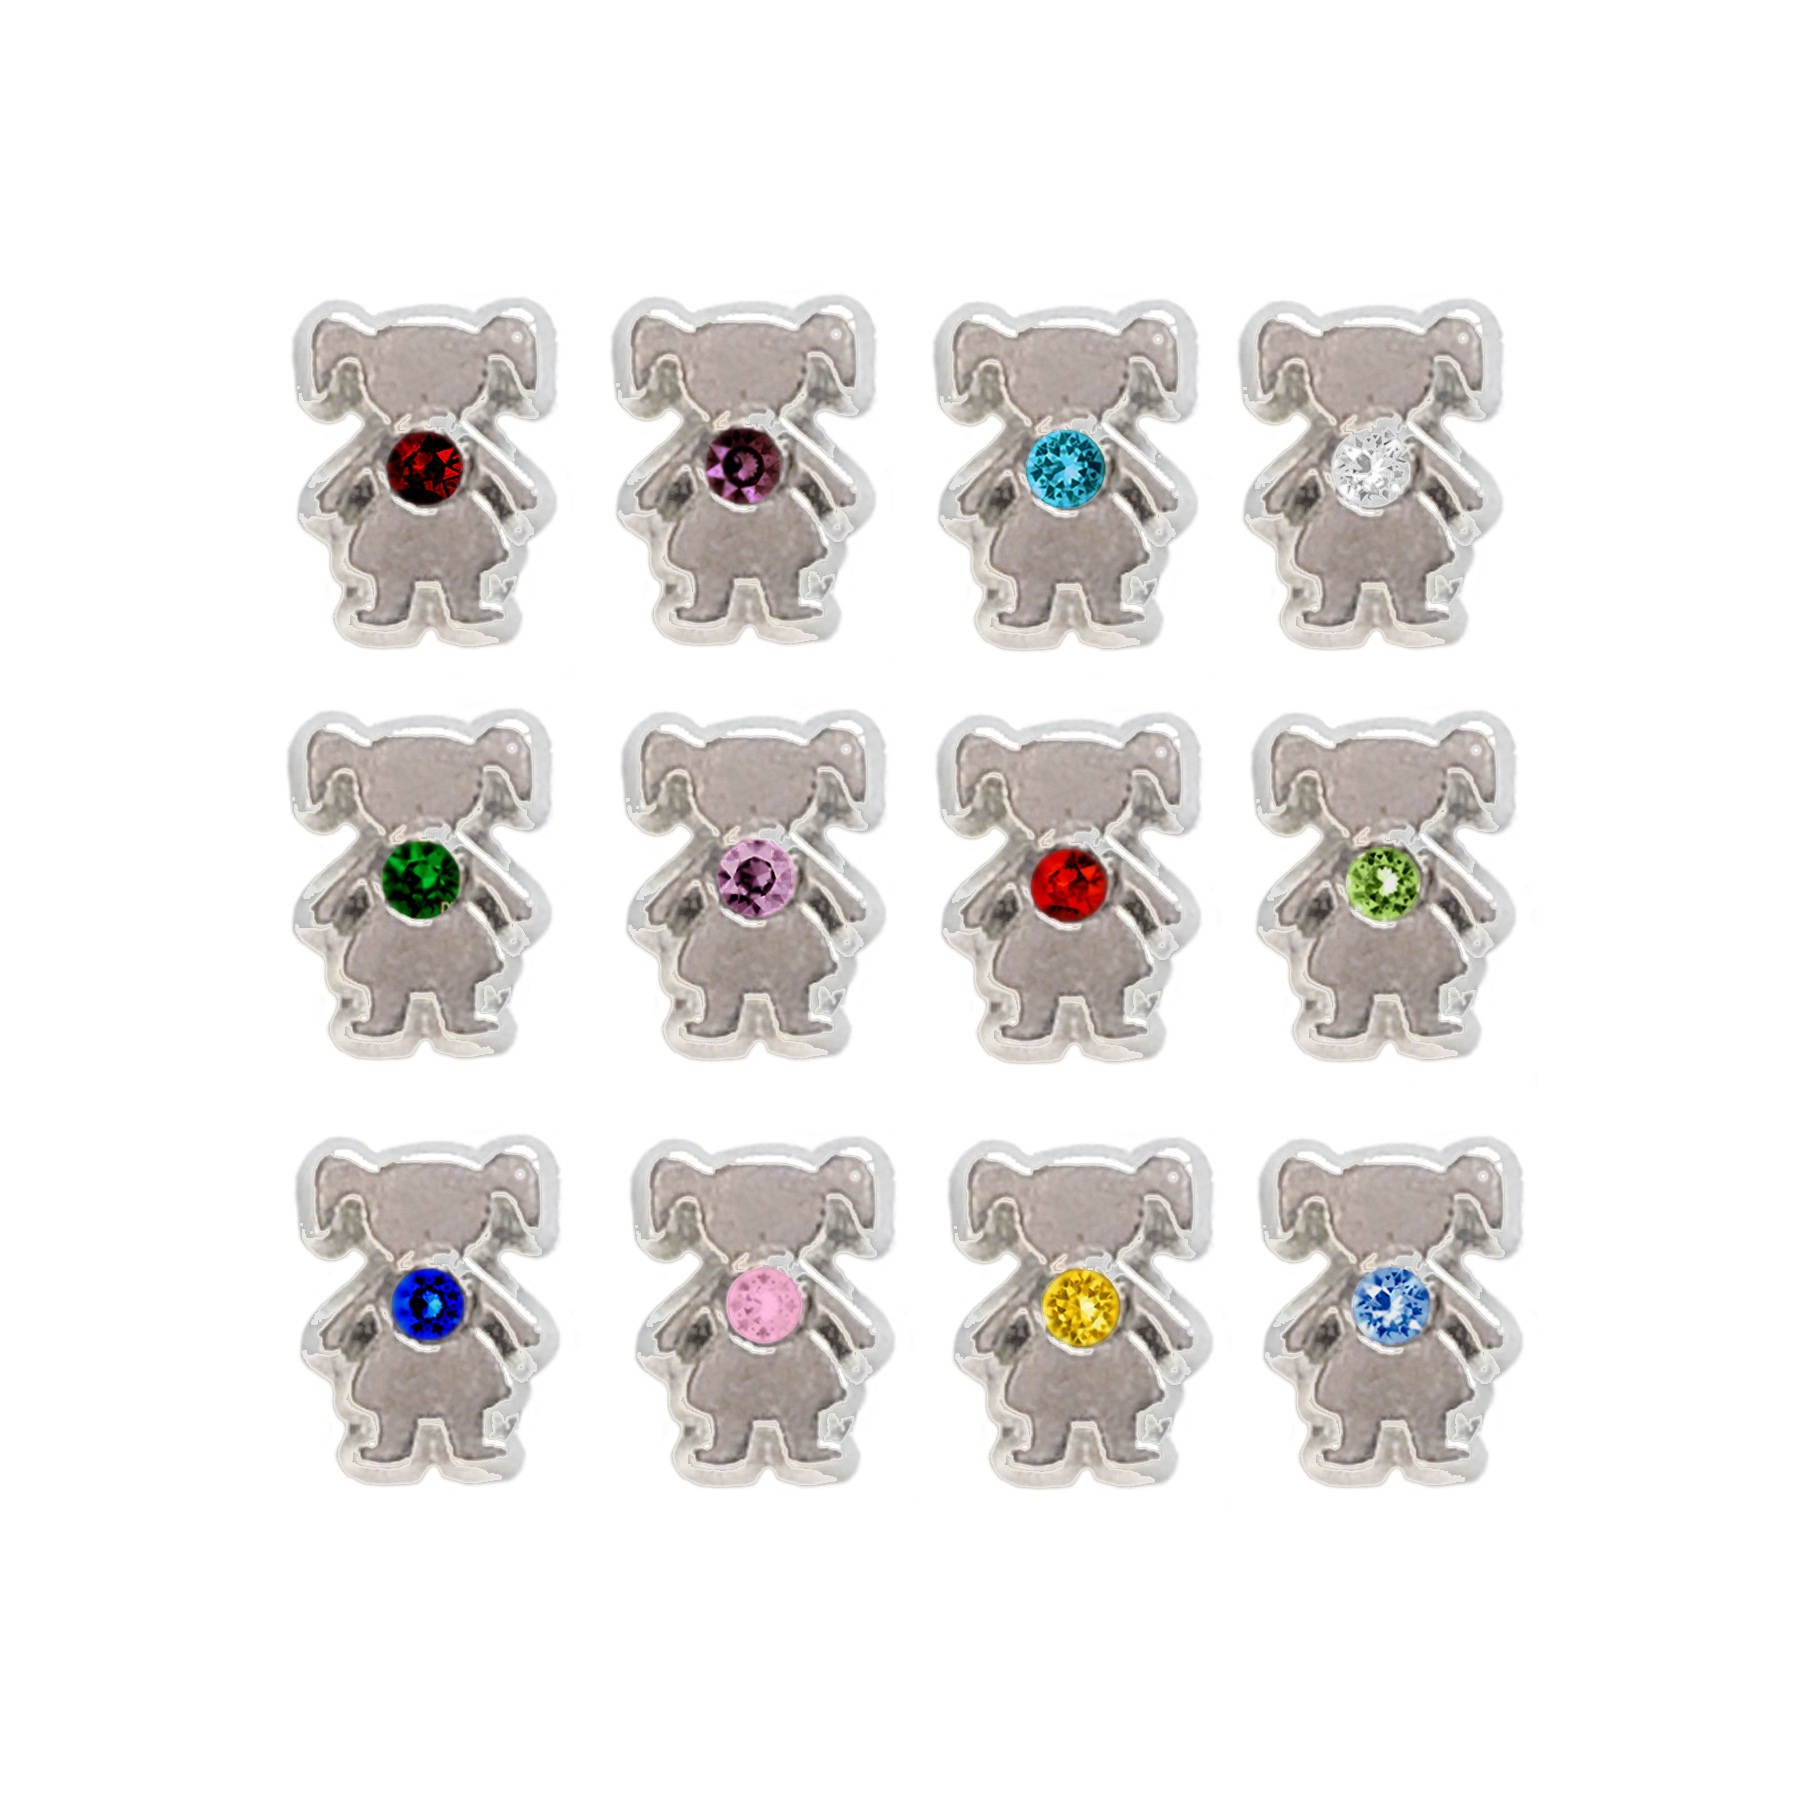 How Many Charms Fit In An Origami Owl Locket Girl Birthstone Floating Charm Fits Origami Owl Lockets